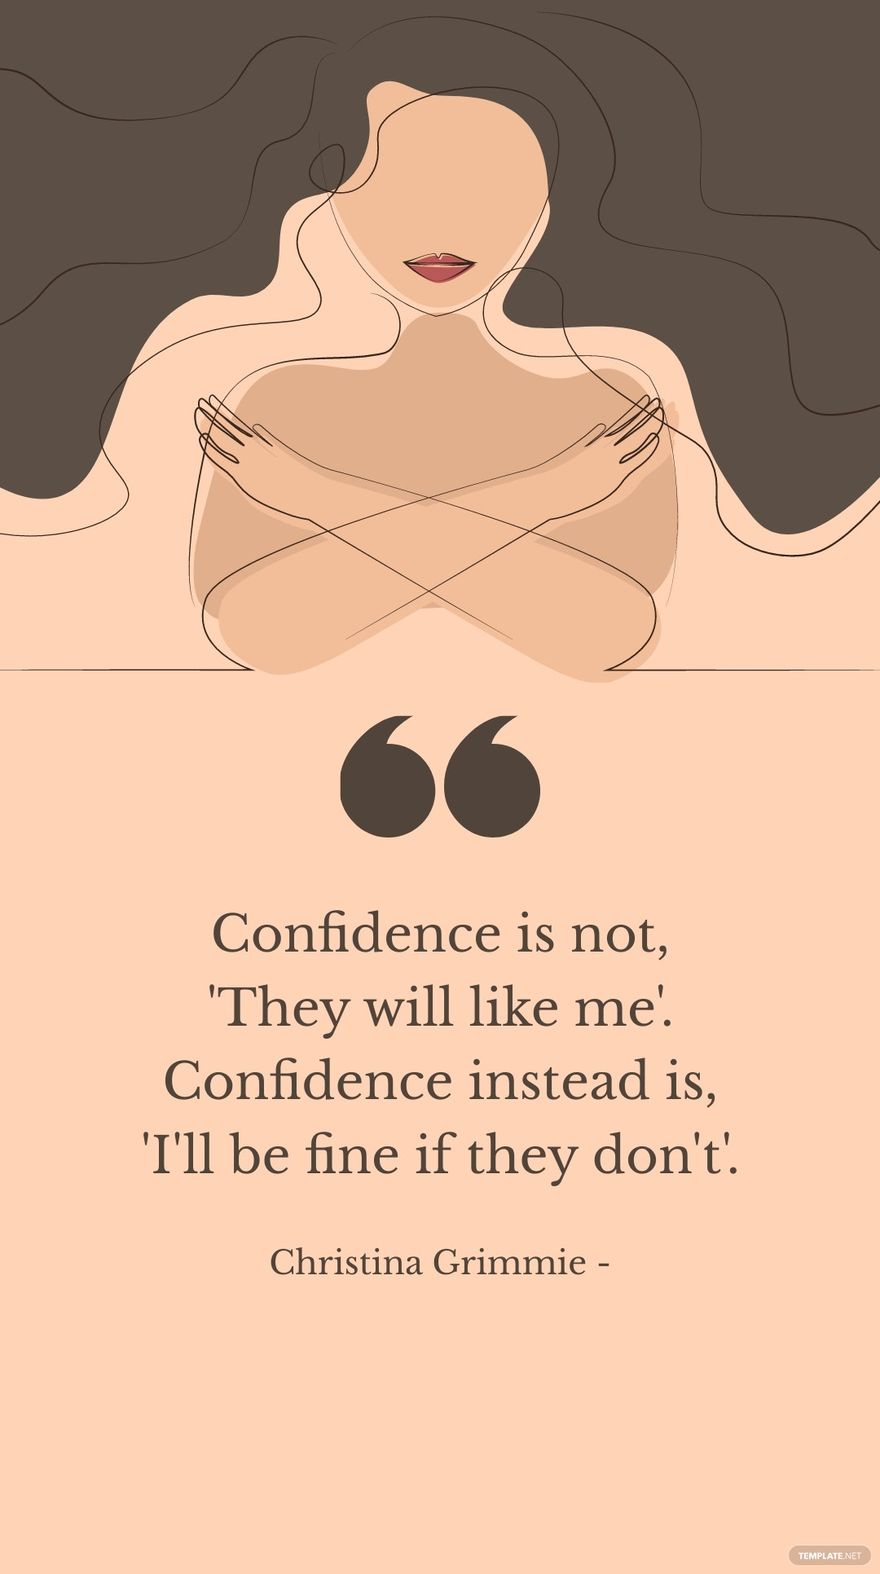 Christina Grimmie - Confidence is not, 'They will like me'. Confidence instead is, 'I'll be fine if they don't'.